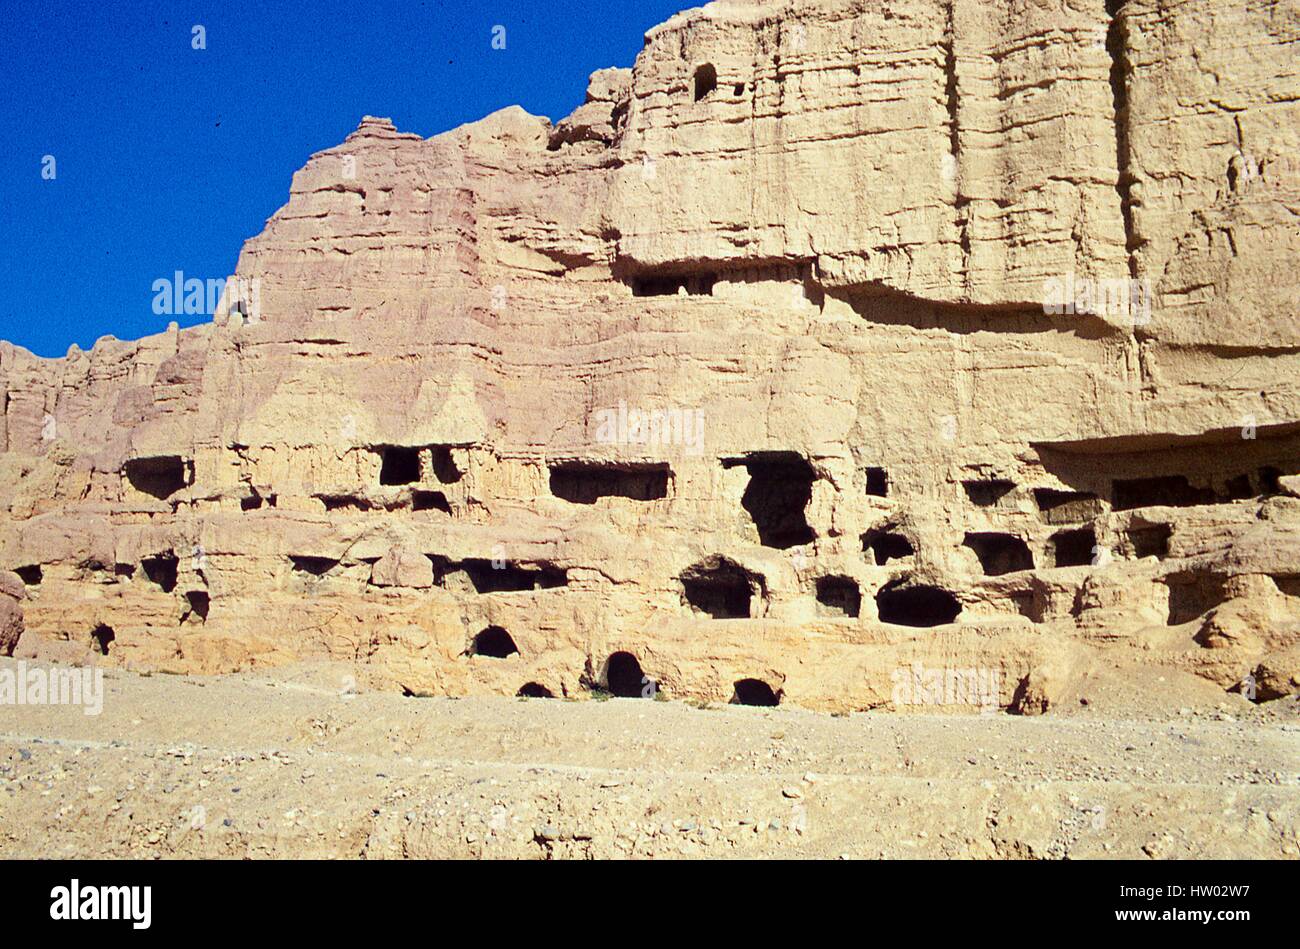 View of ancient caves cut into the hillside at Bamiyan, in the Hazarajat region of central Afghanistan, November, 1975. Stock Photo